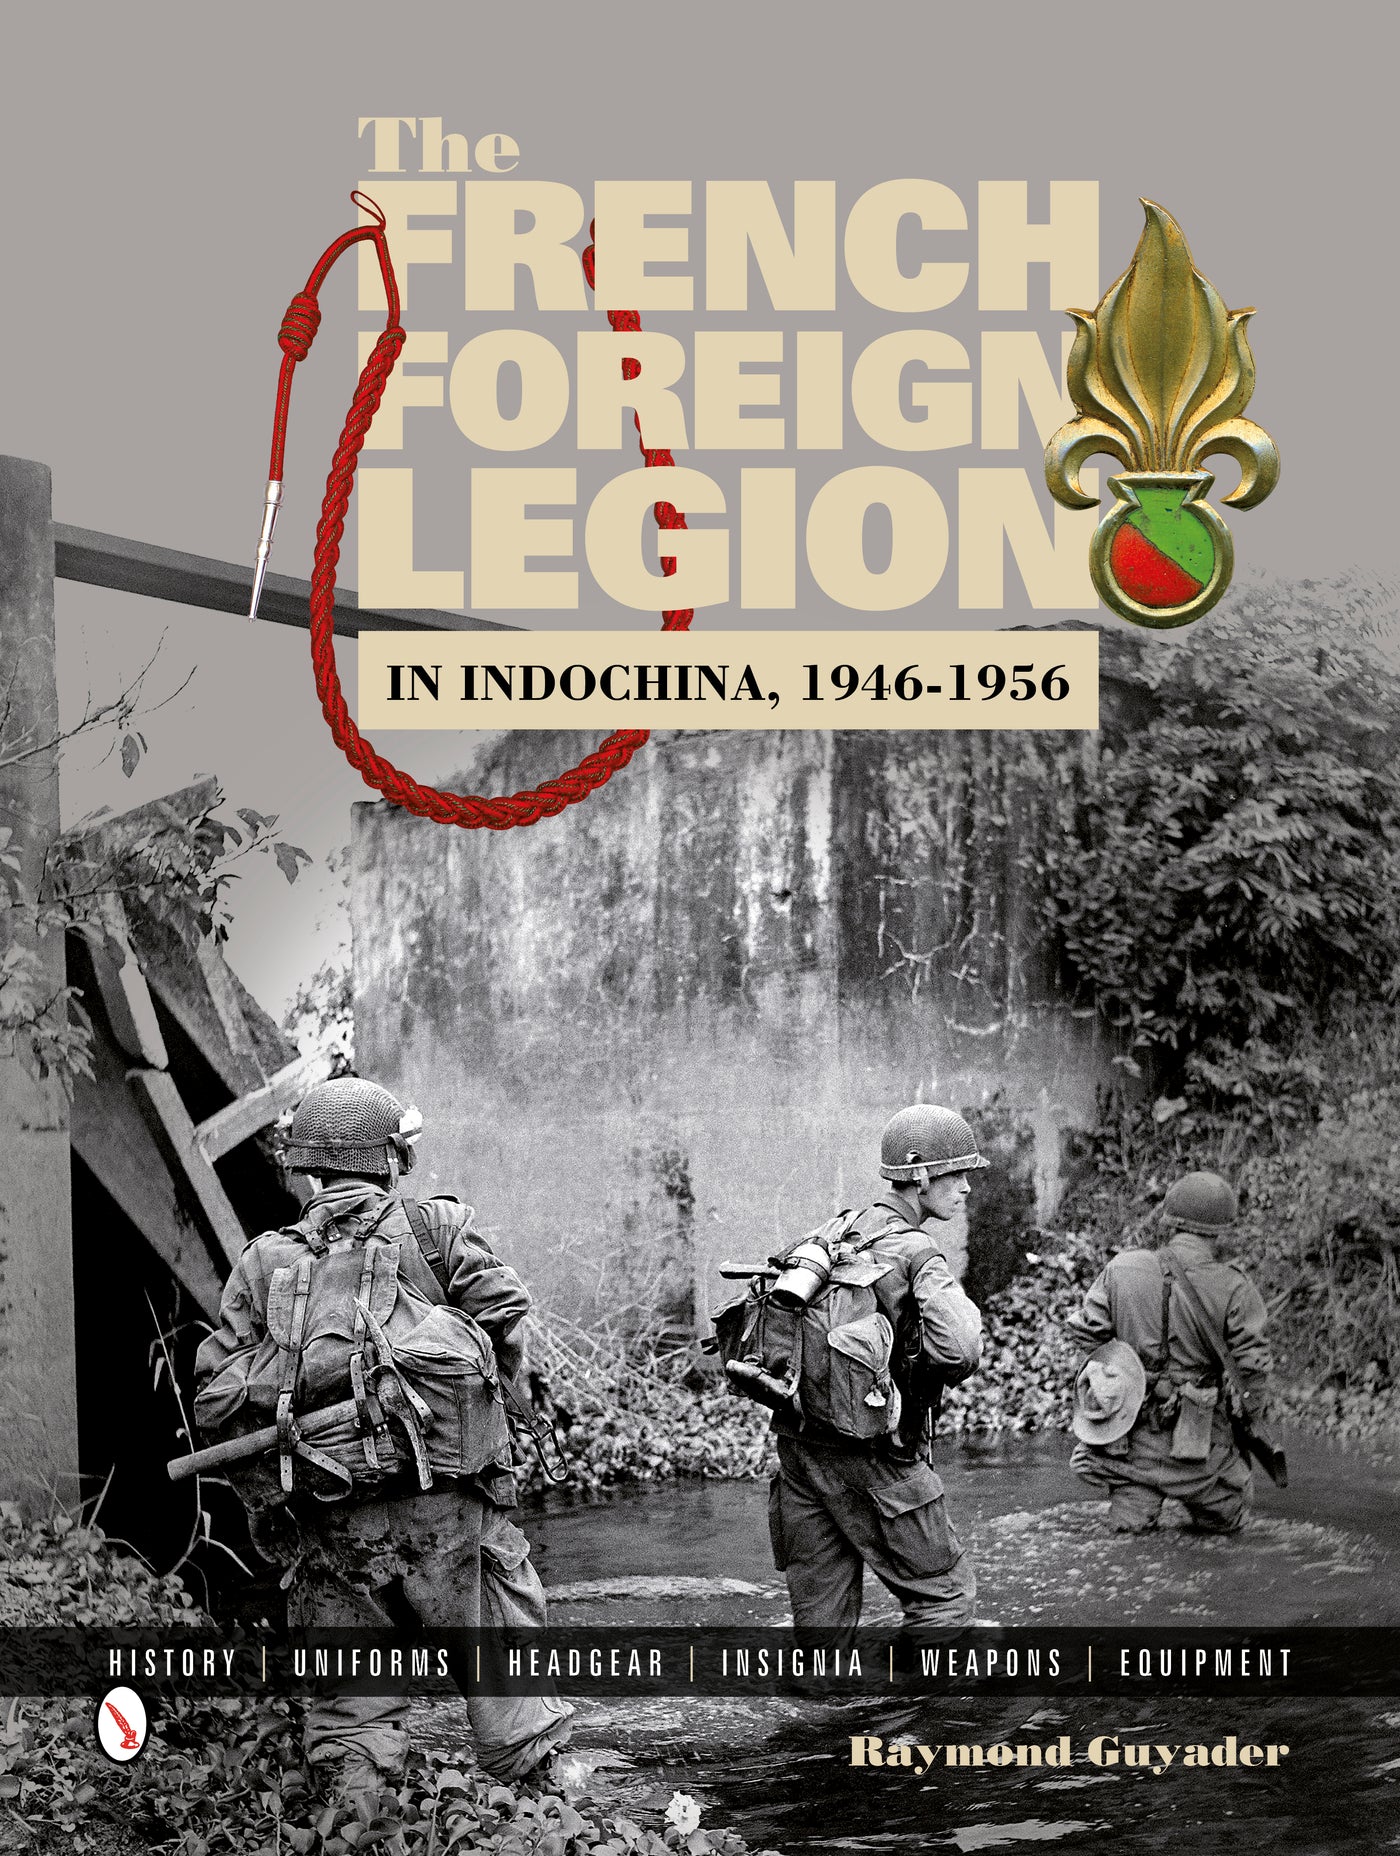 The French Foreign Legion in Indochina, 1946-1956